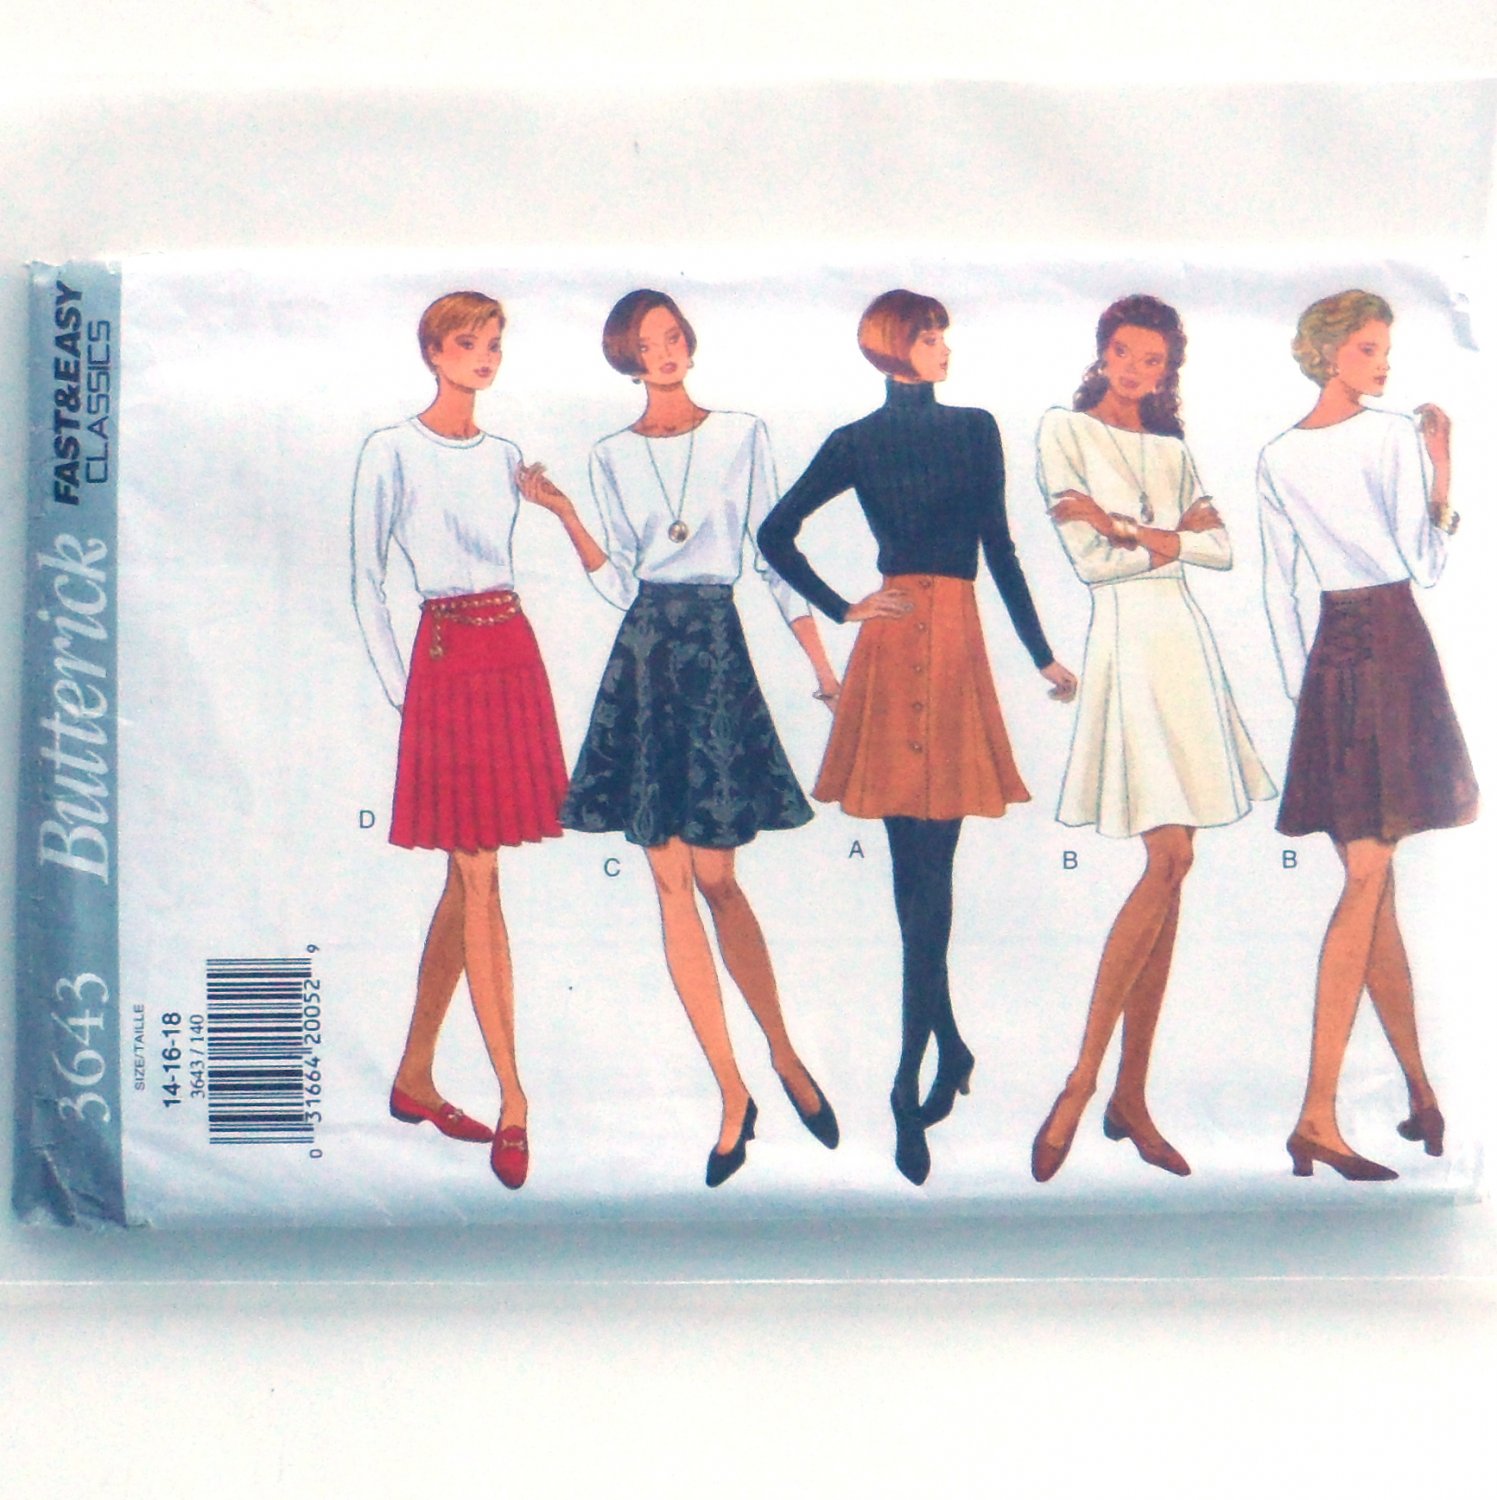 Misses Skirts 14 16 18 OOP Butterick Sewing Pattern 3643